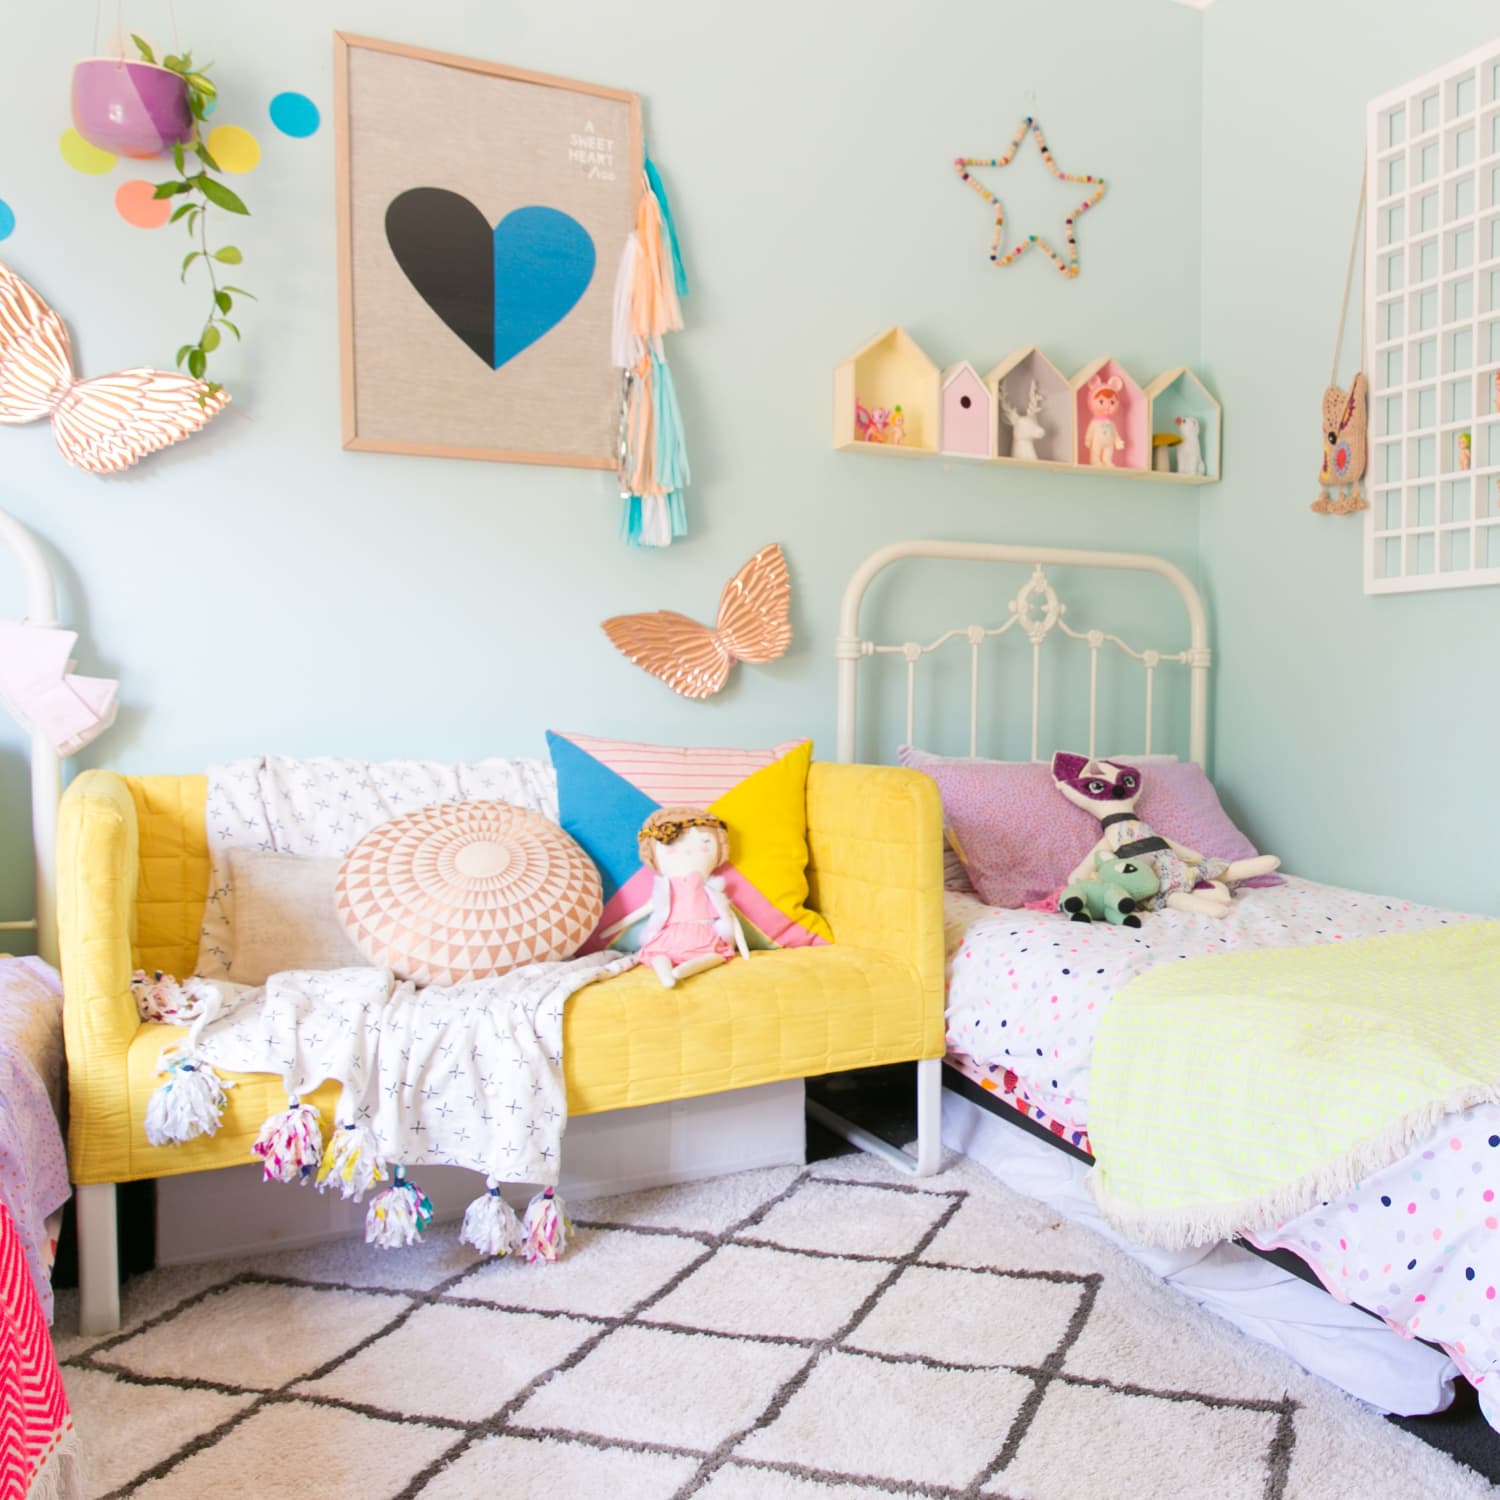 Small Kids Bedroom Mistakes – The Easy Design Errors You Can Make (and How To Avoid Them)